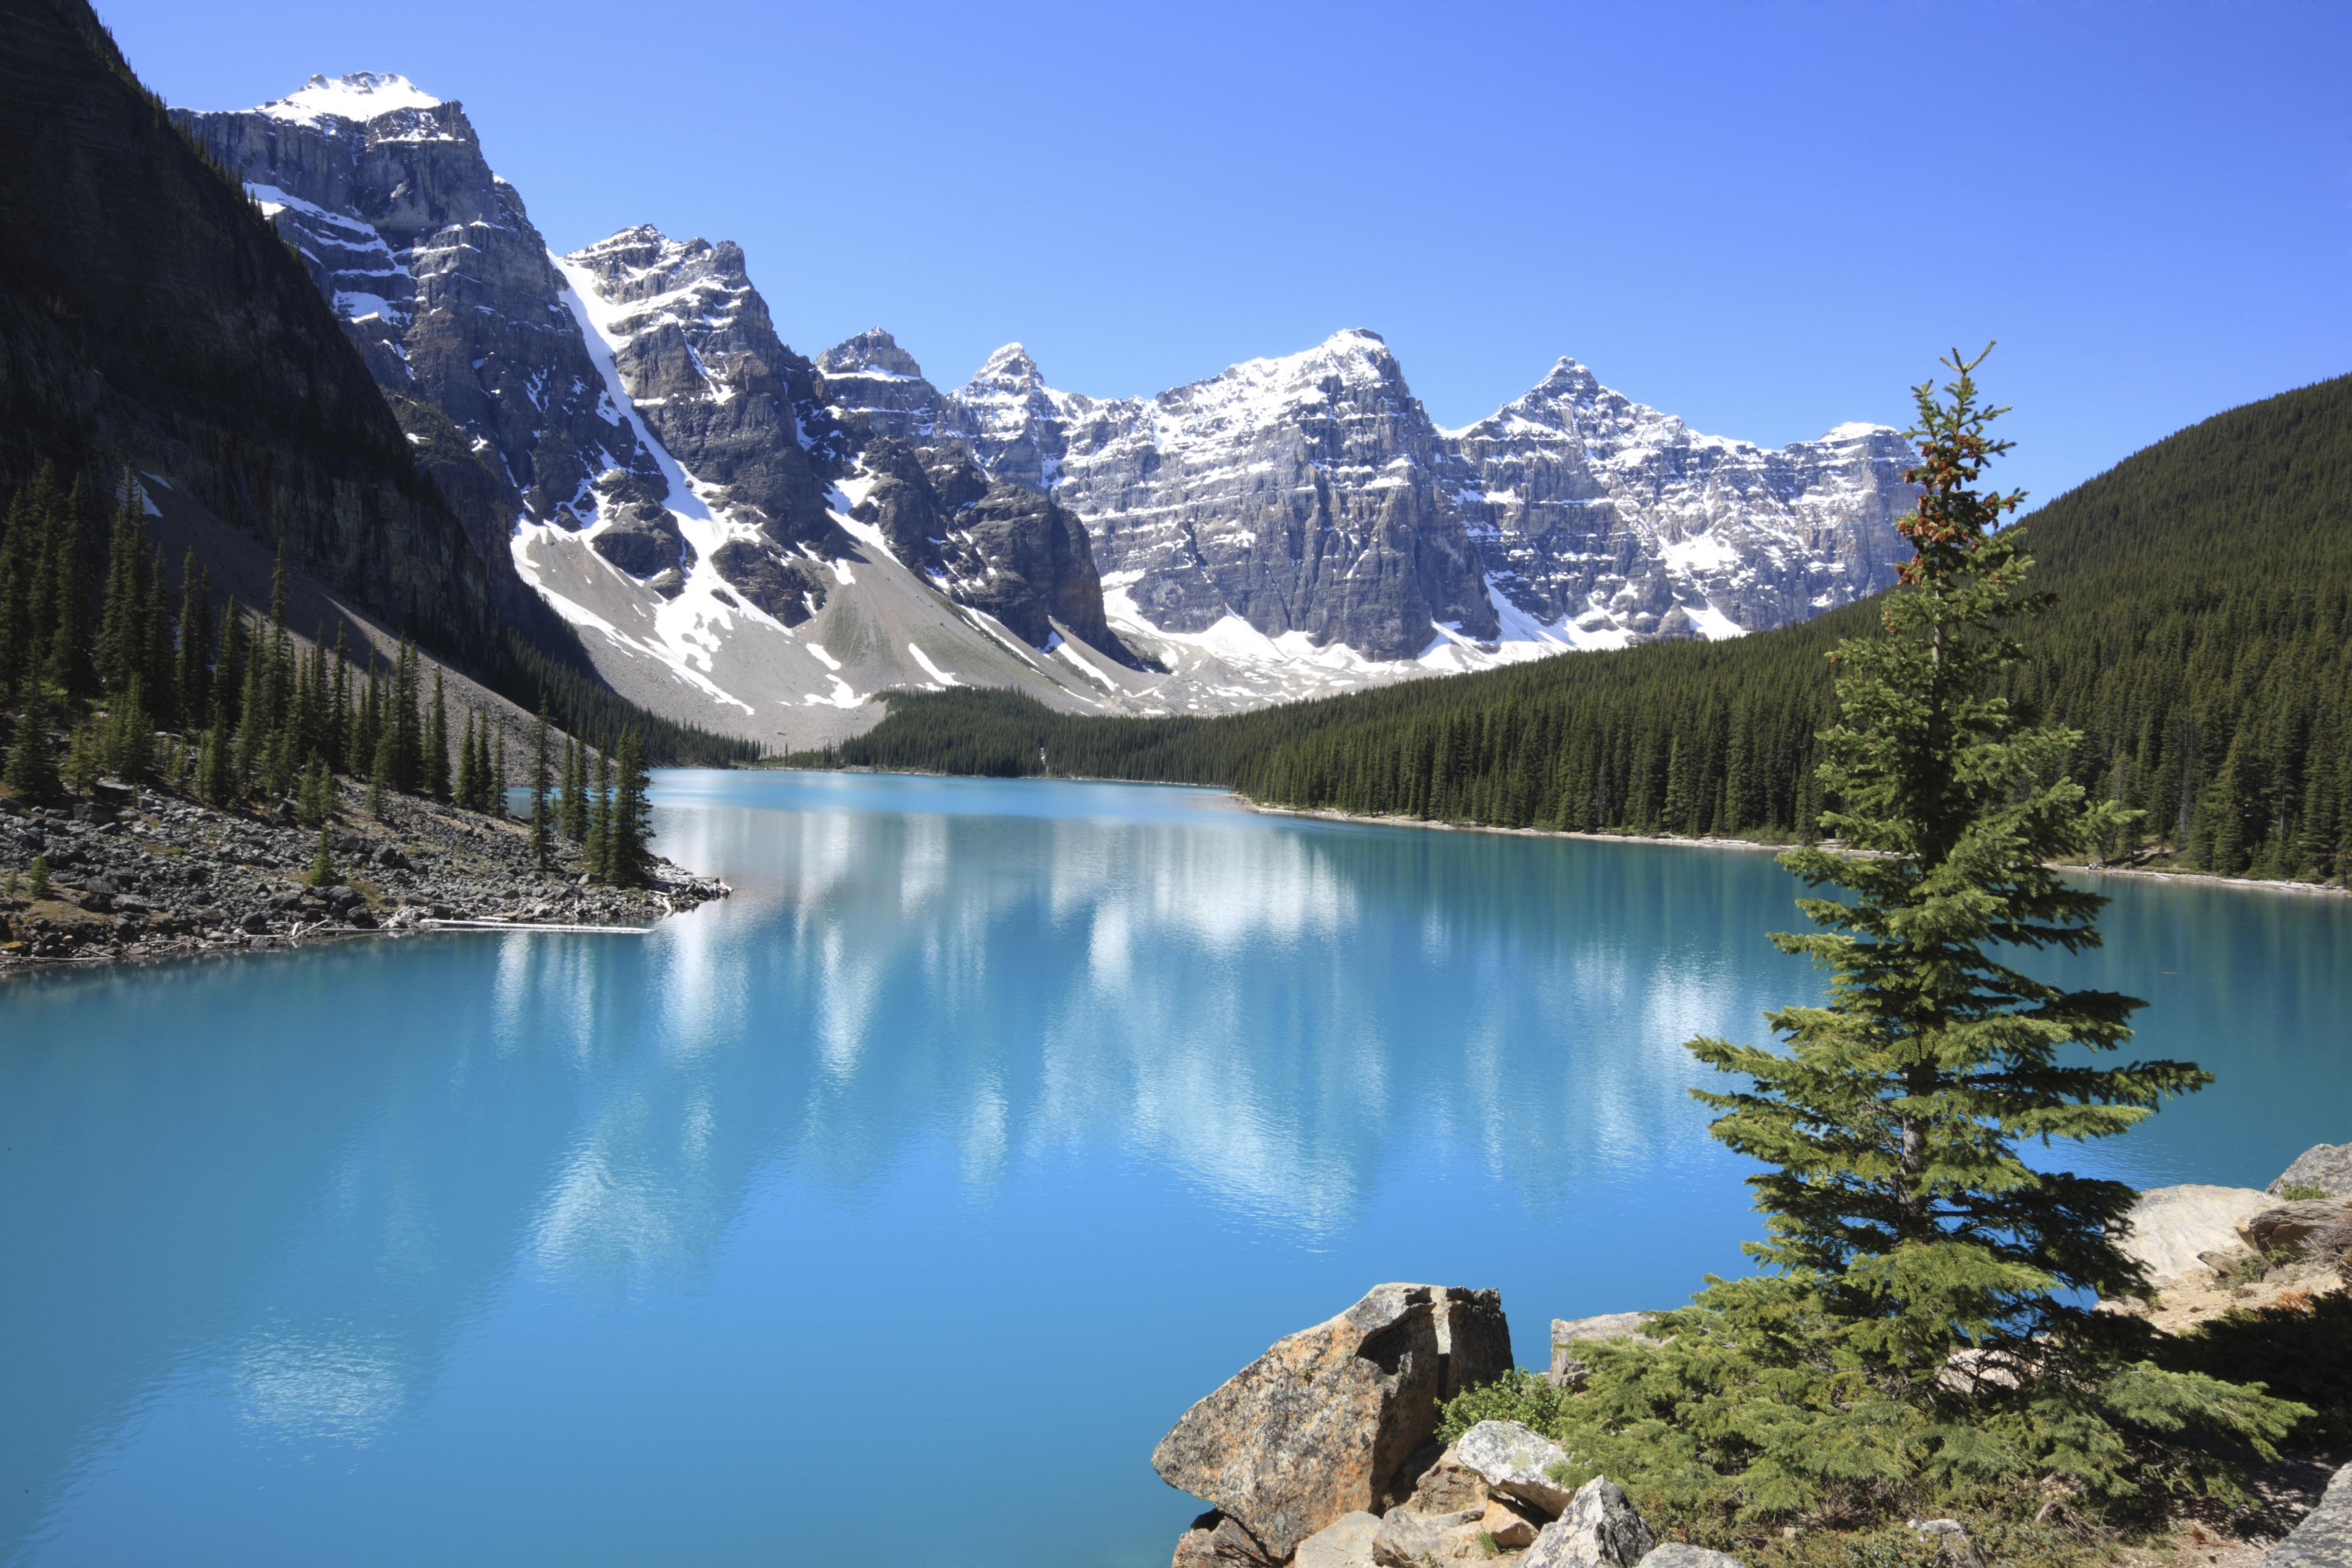 10 Best Canadian Rockies Tours for Singles / Solo Travelers TourRadar